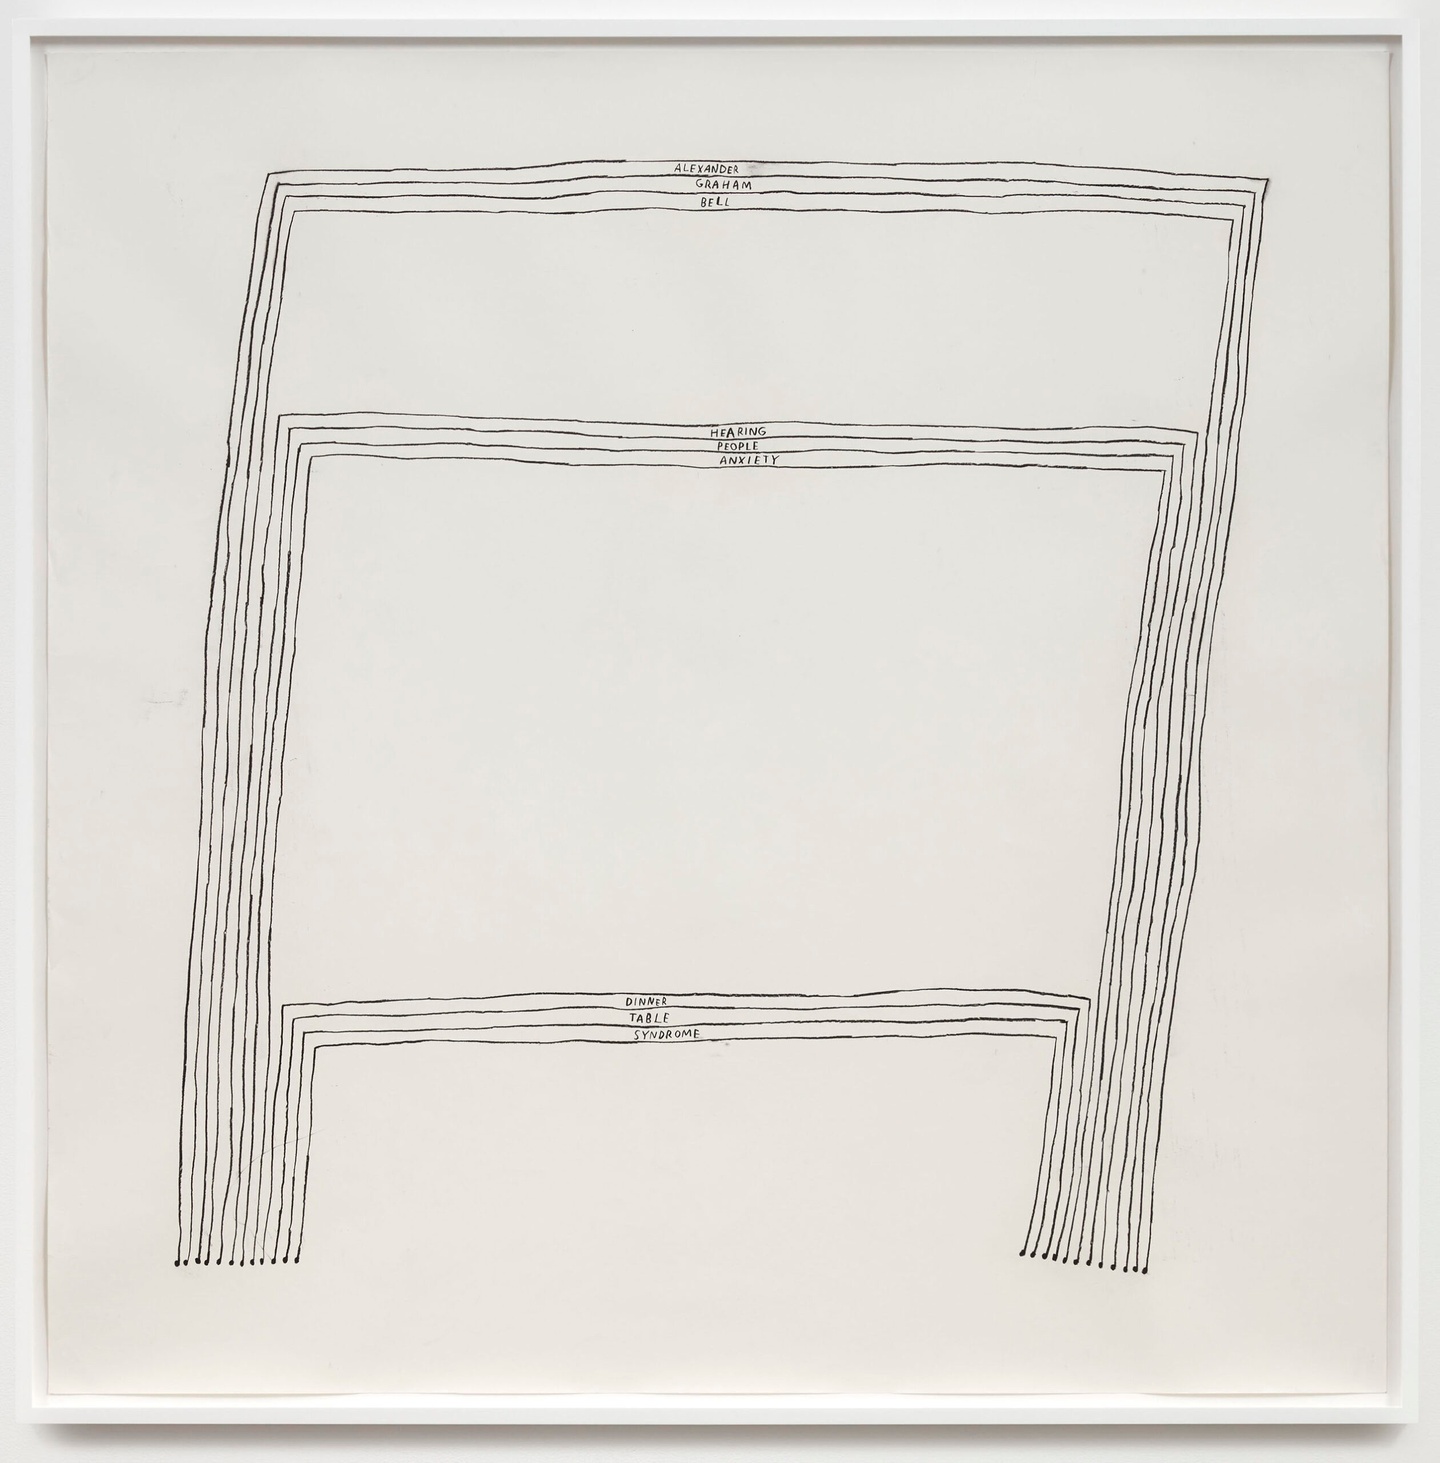 Black-and-white, pencil on paper drawing of three stacks of lines resembling tables, with words included in each set of stacks.